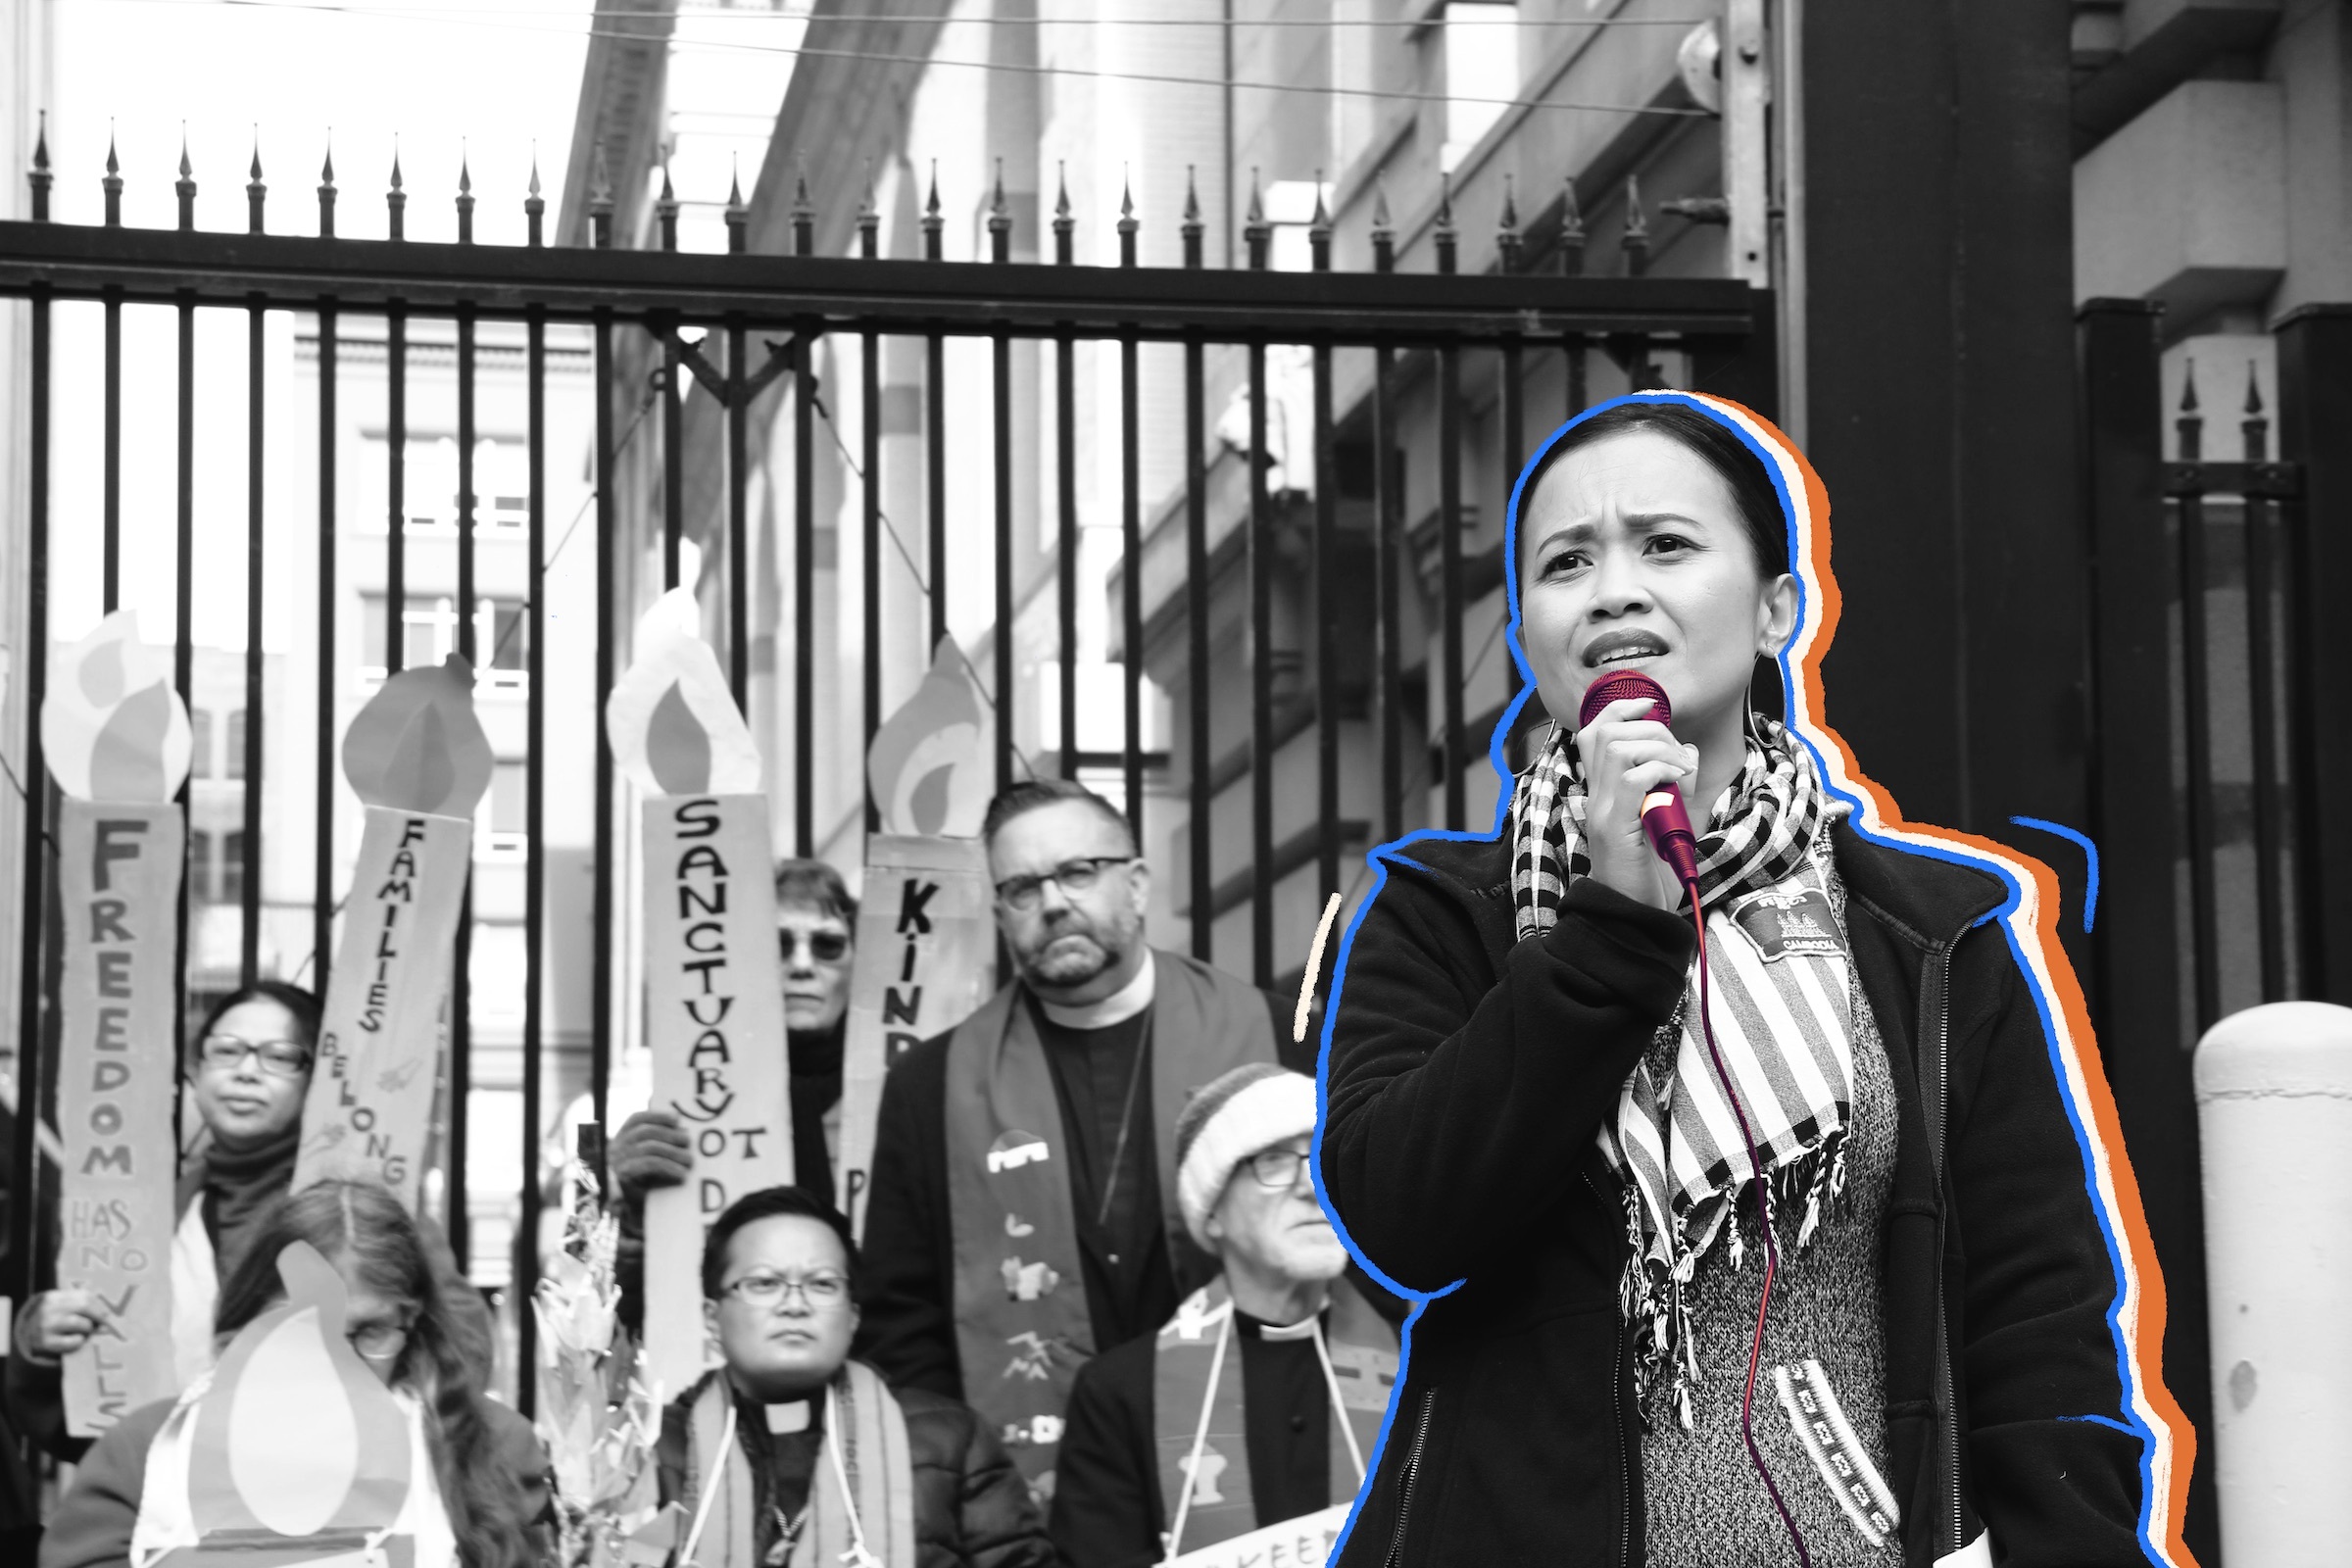 Woman wearing a scarf and black jacket holds a microphone at a rally. A group of community members and faith leaders holding signs stand behind her.